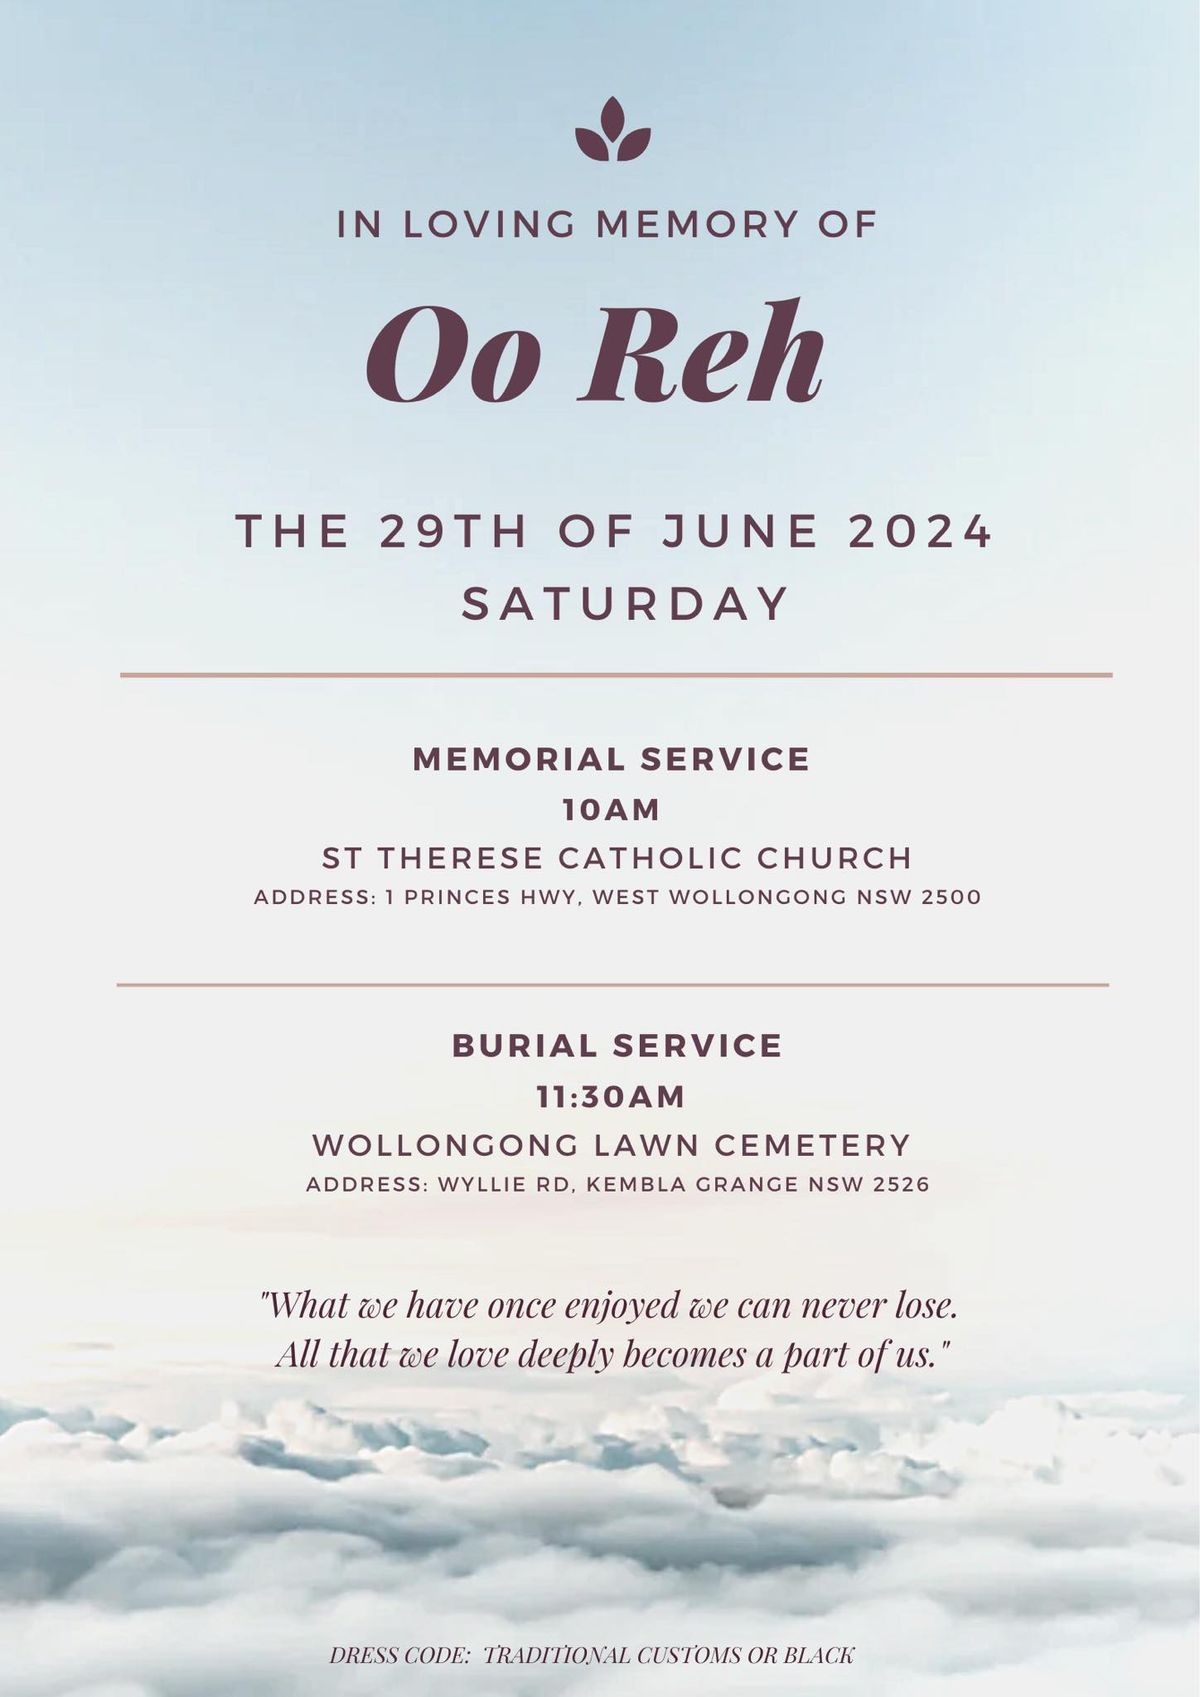 Celebration of Life for Oo Reh